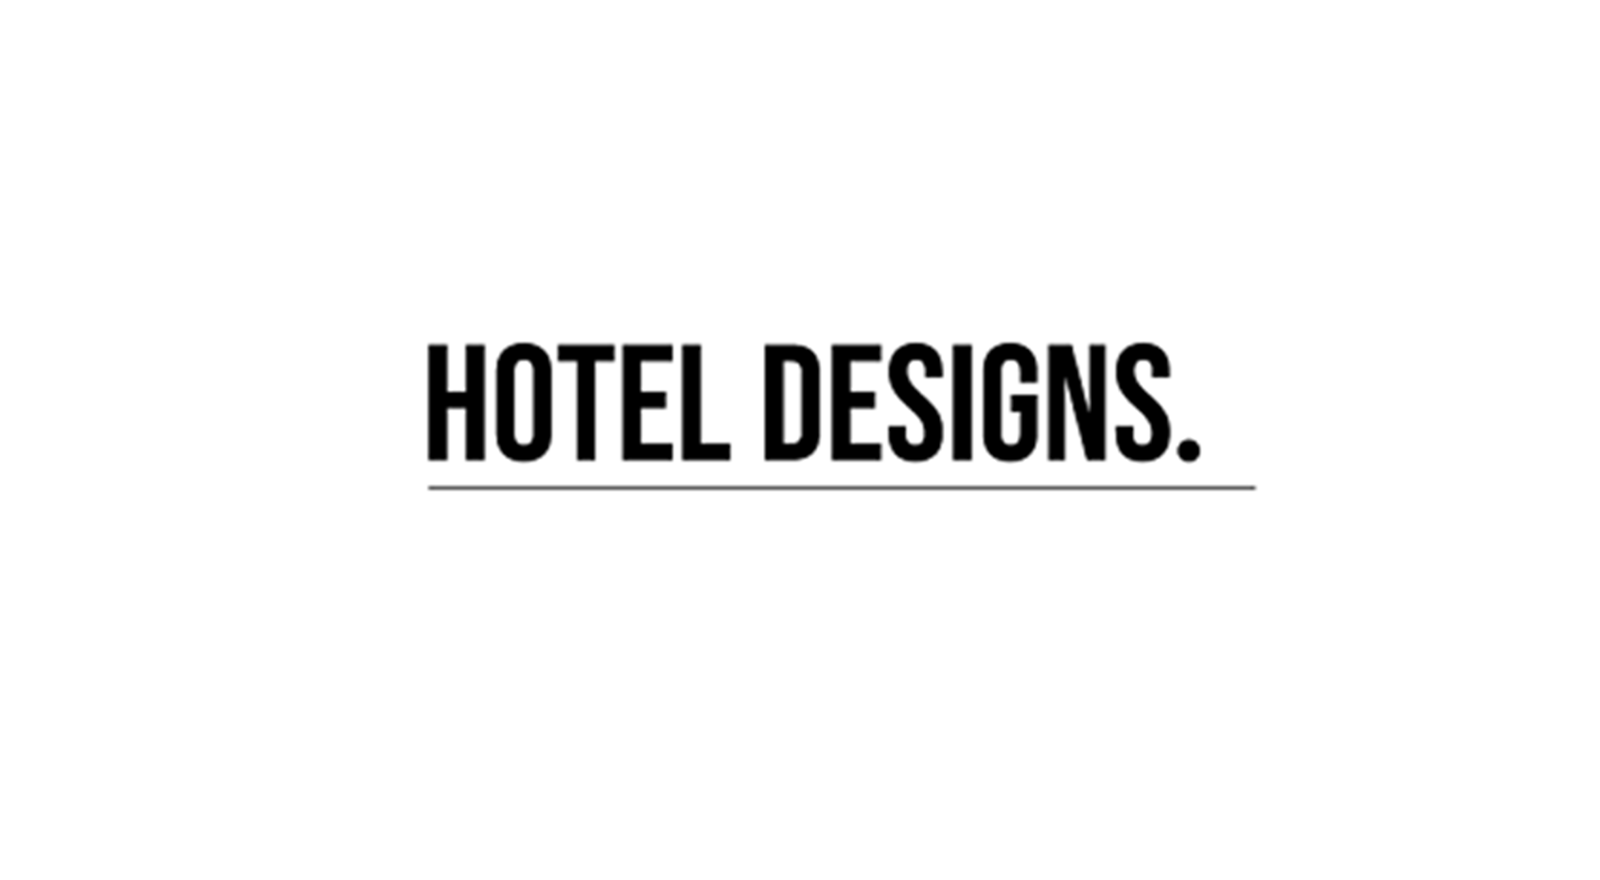 Press Release - Timage are featured in 'Hotel Designs' for August